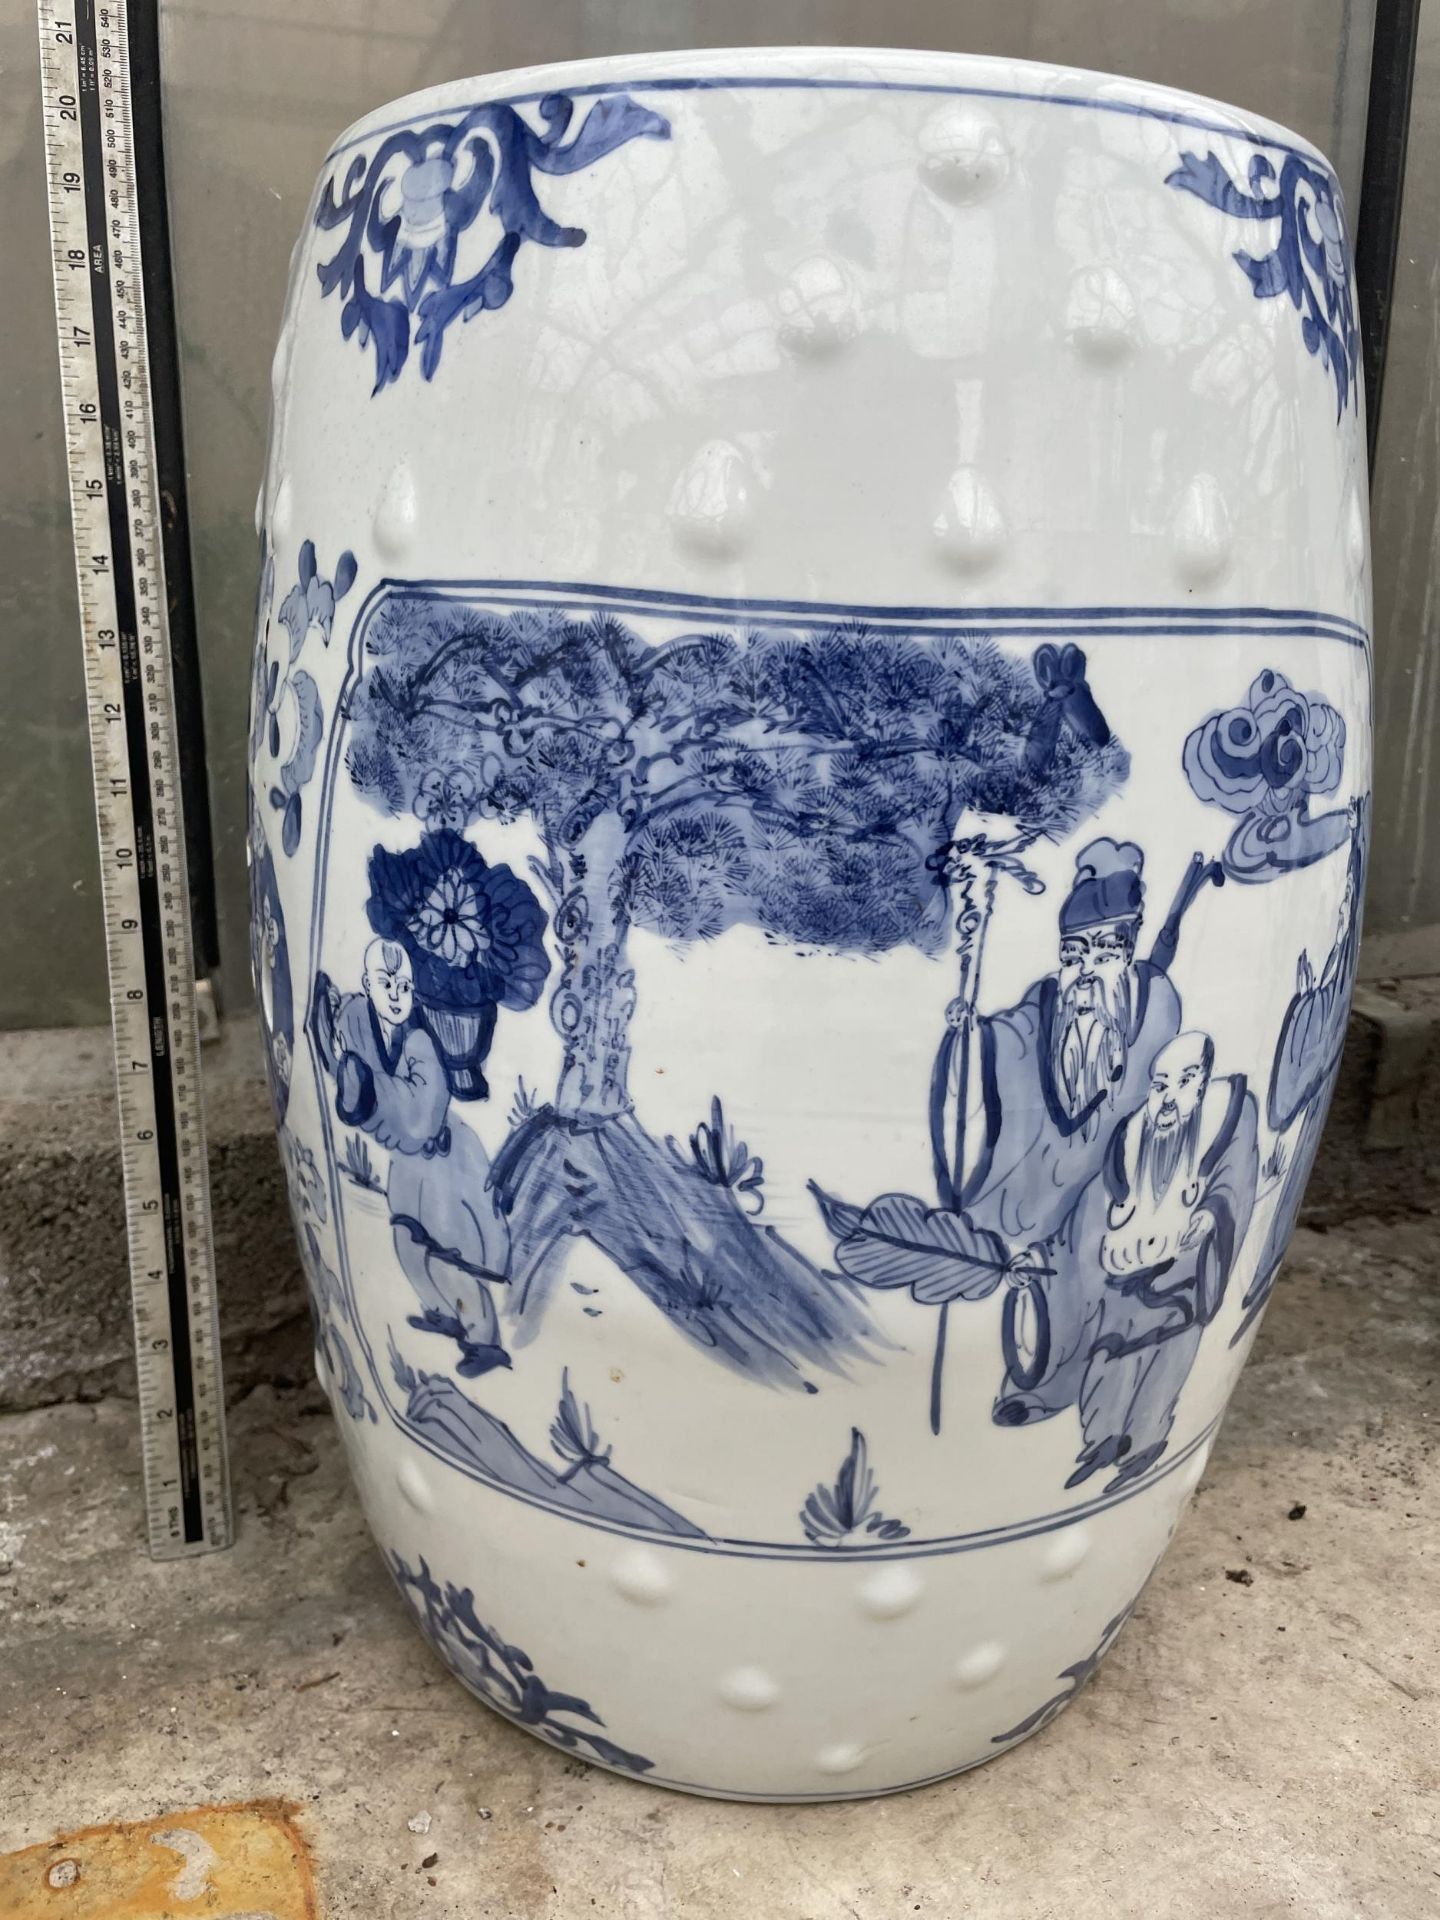 A BLUE AND WHITE ORIENTAL STYLE CERAMIC STOOL (H:47CM) - Image 2 of 4